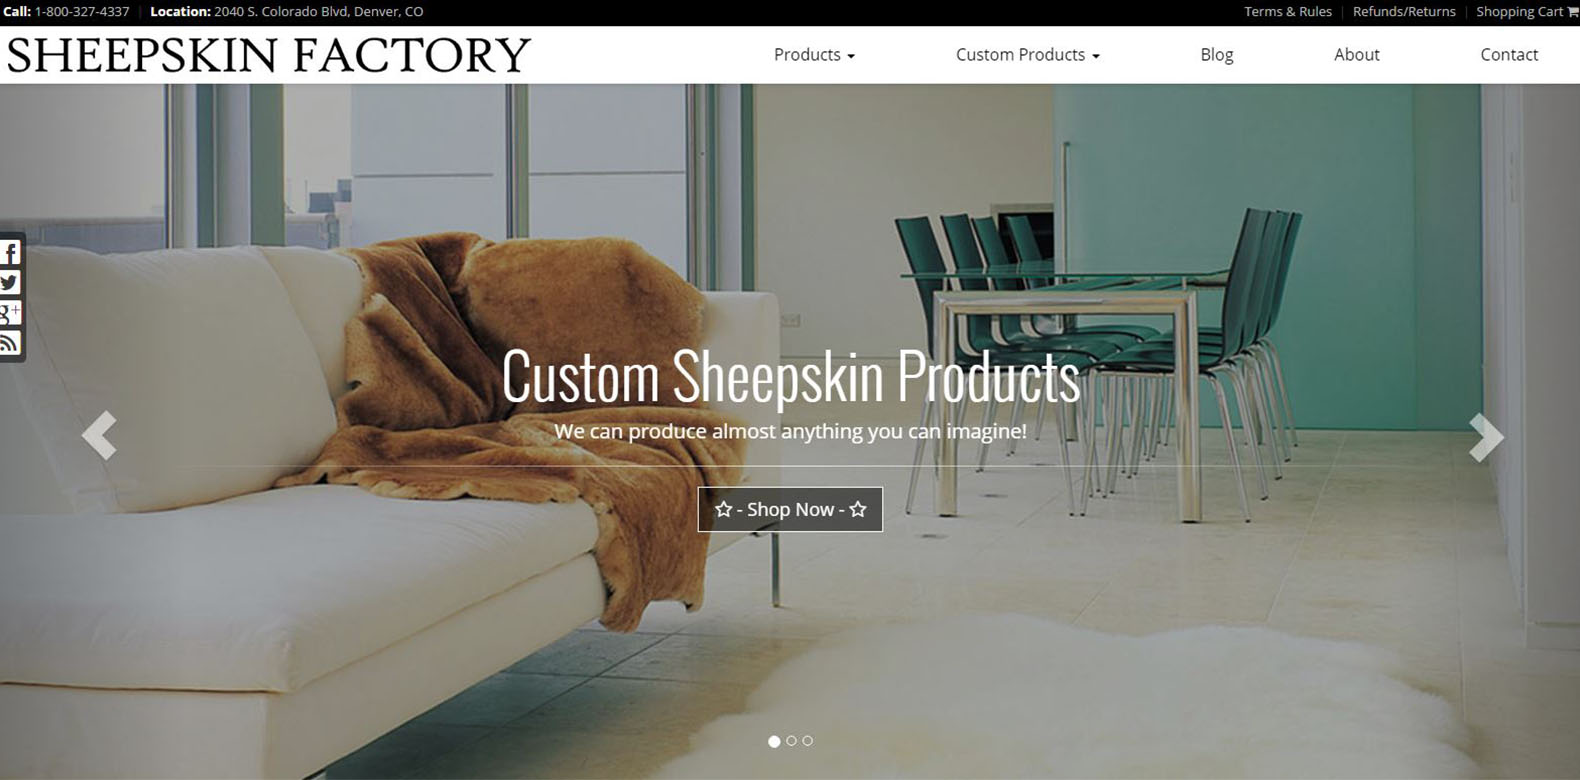 
New Website Launched: Sheepskin Factory